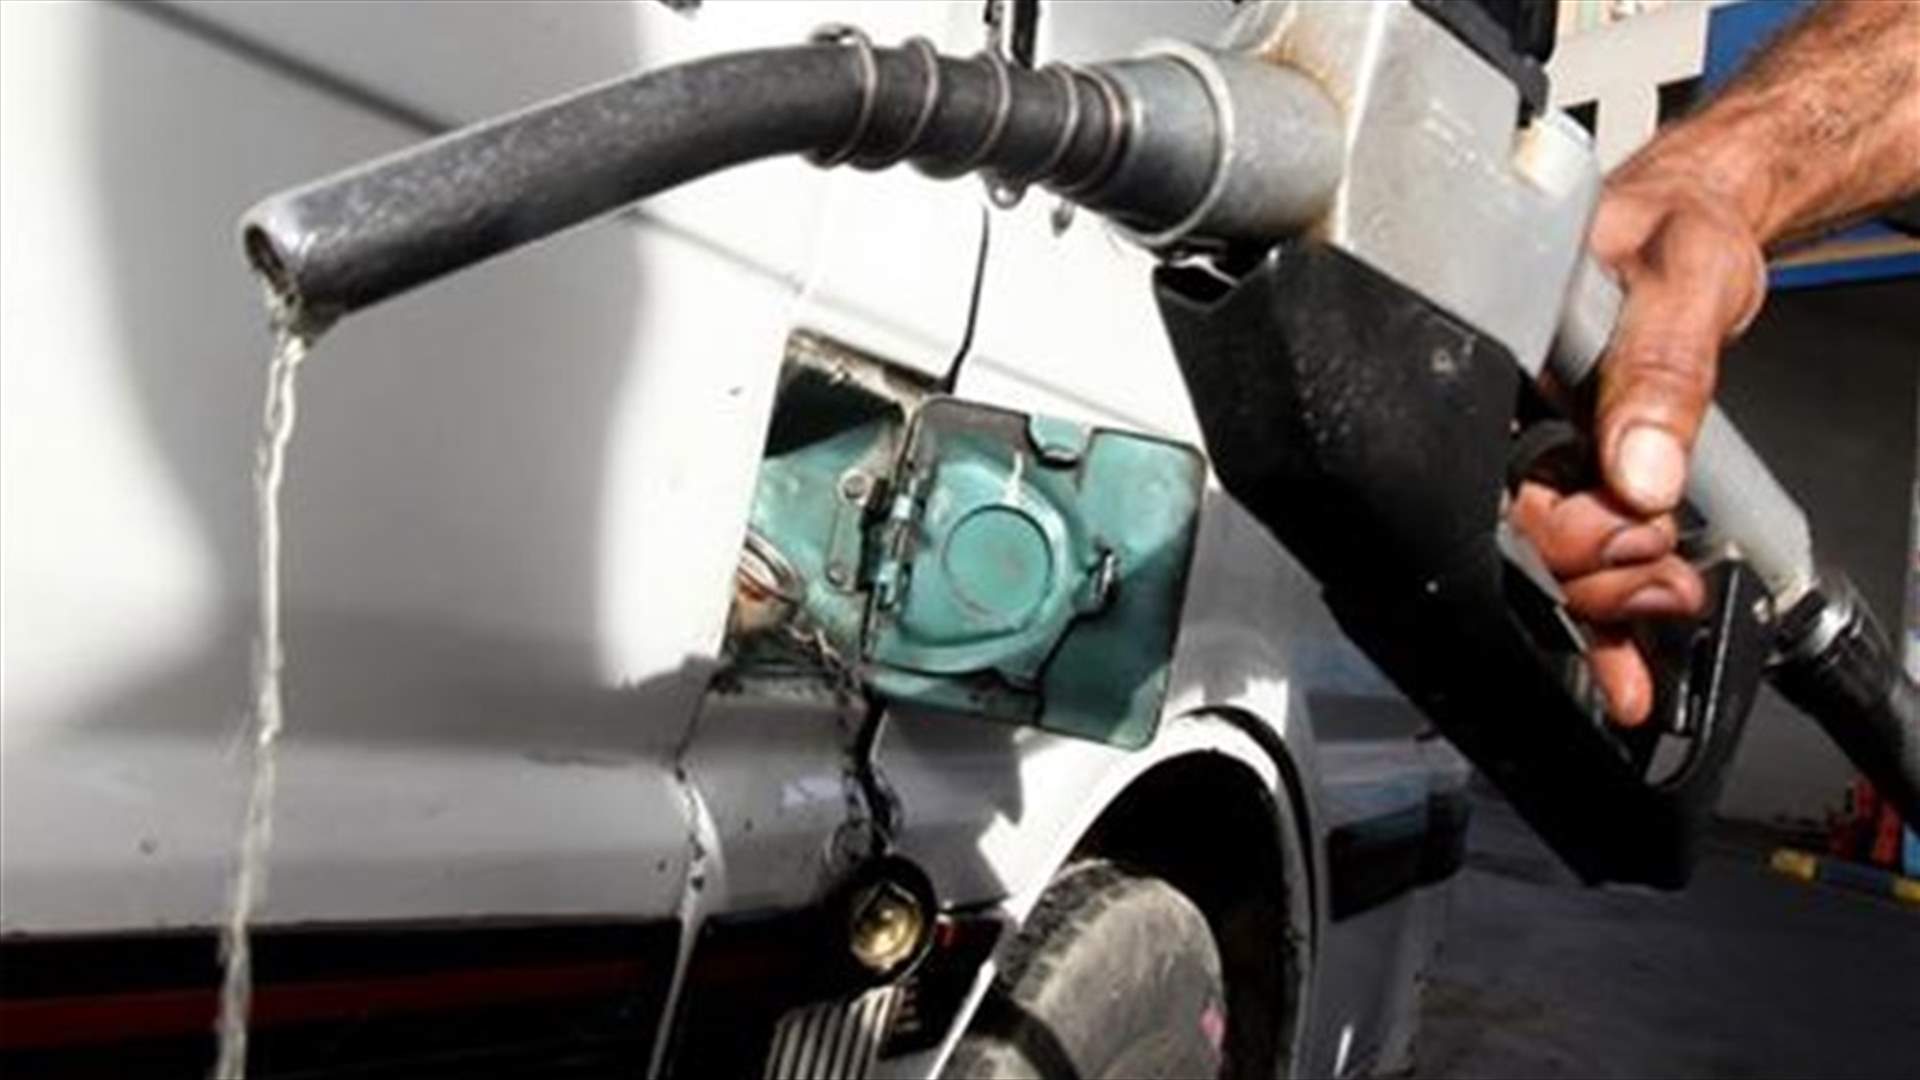 Fuel prices witness further increase